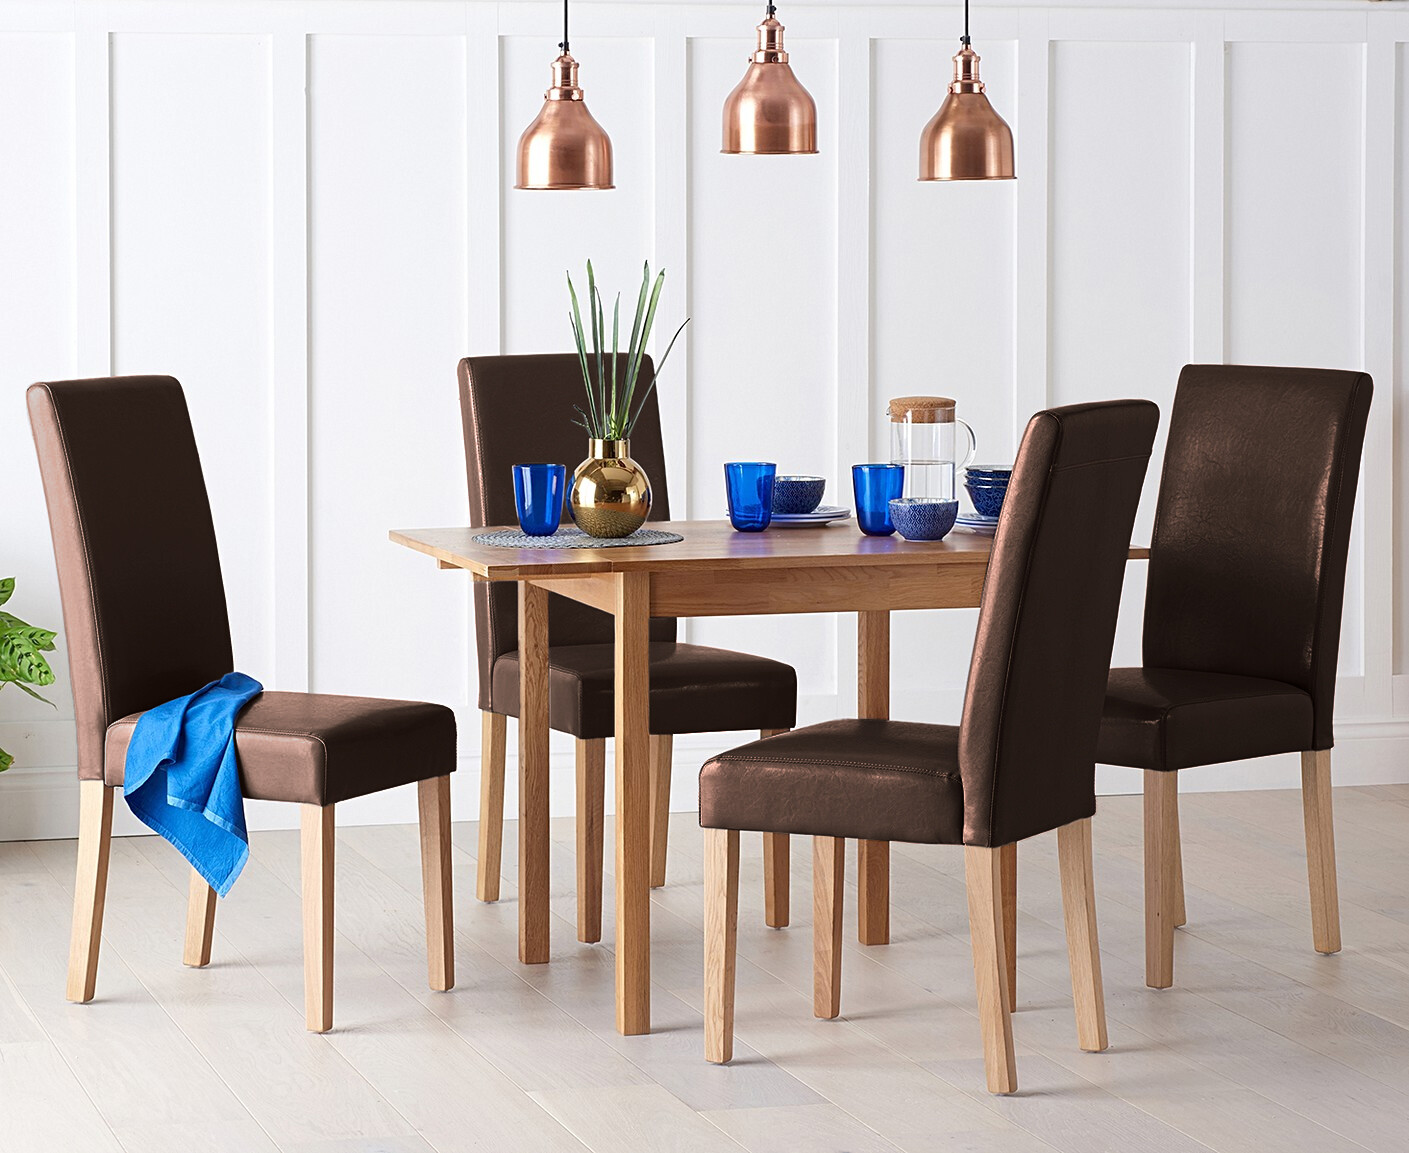 Extending York 70cm Solid Oak Dining Table With 4 Brown Olivia Chairs